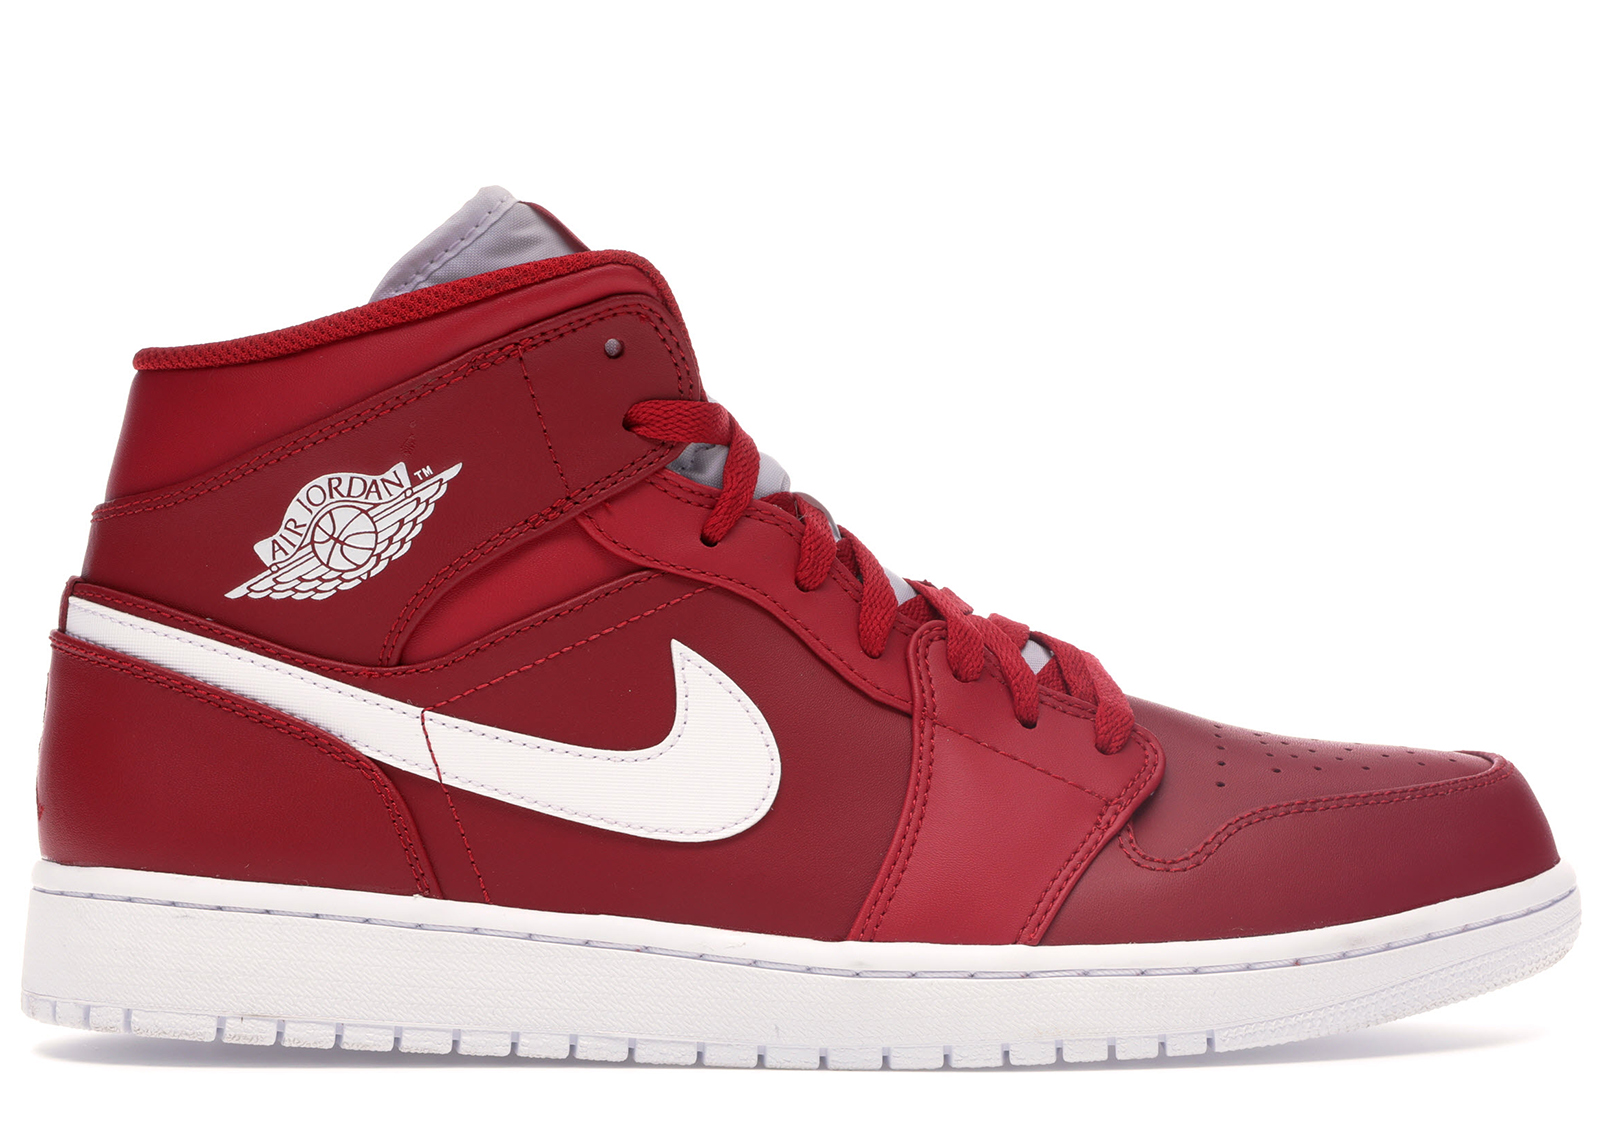 red and white mid jordans